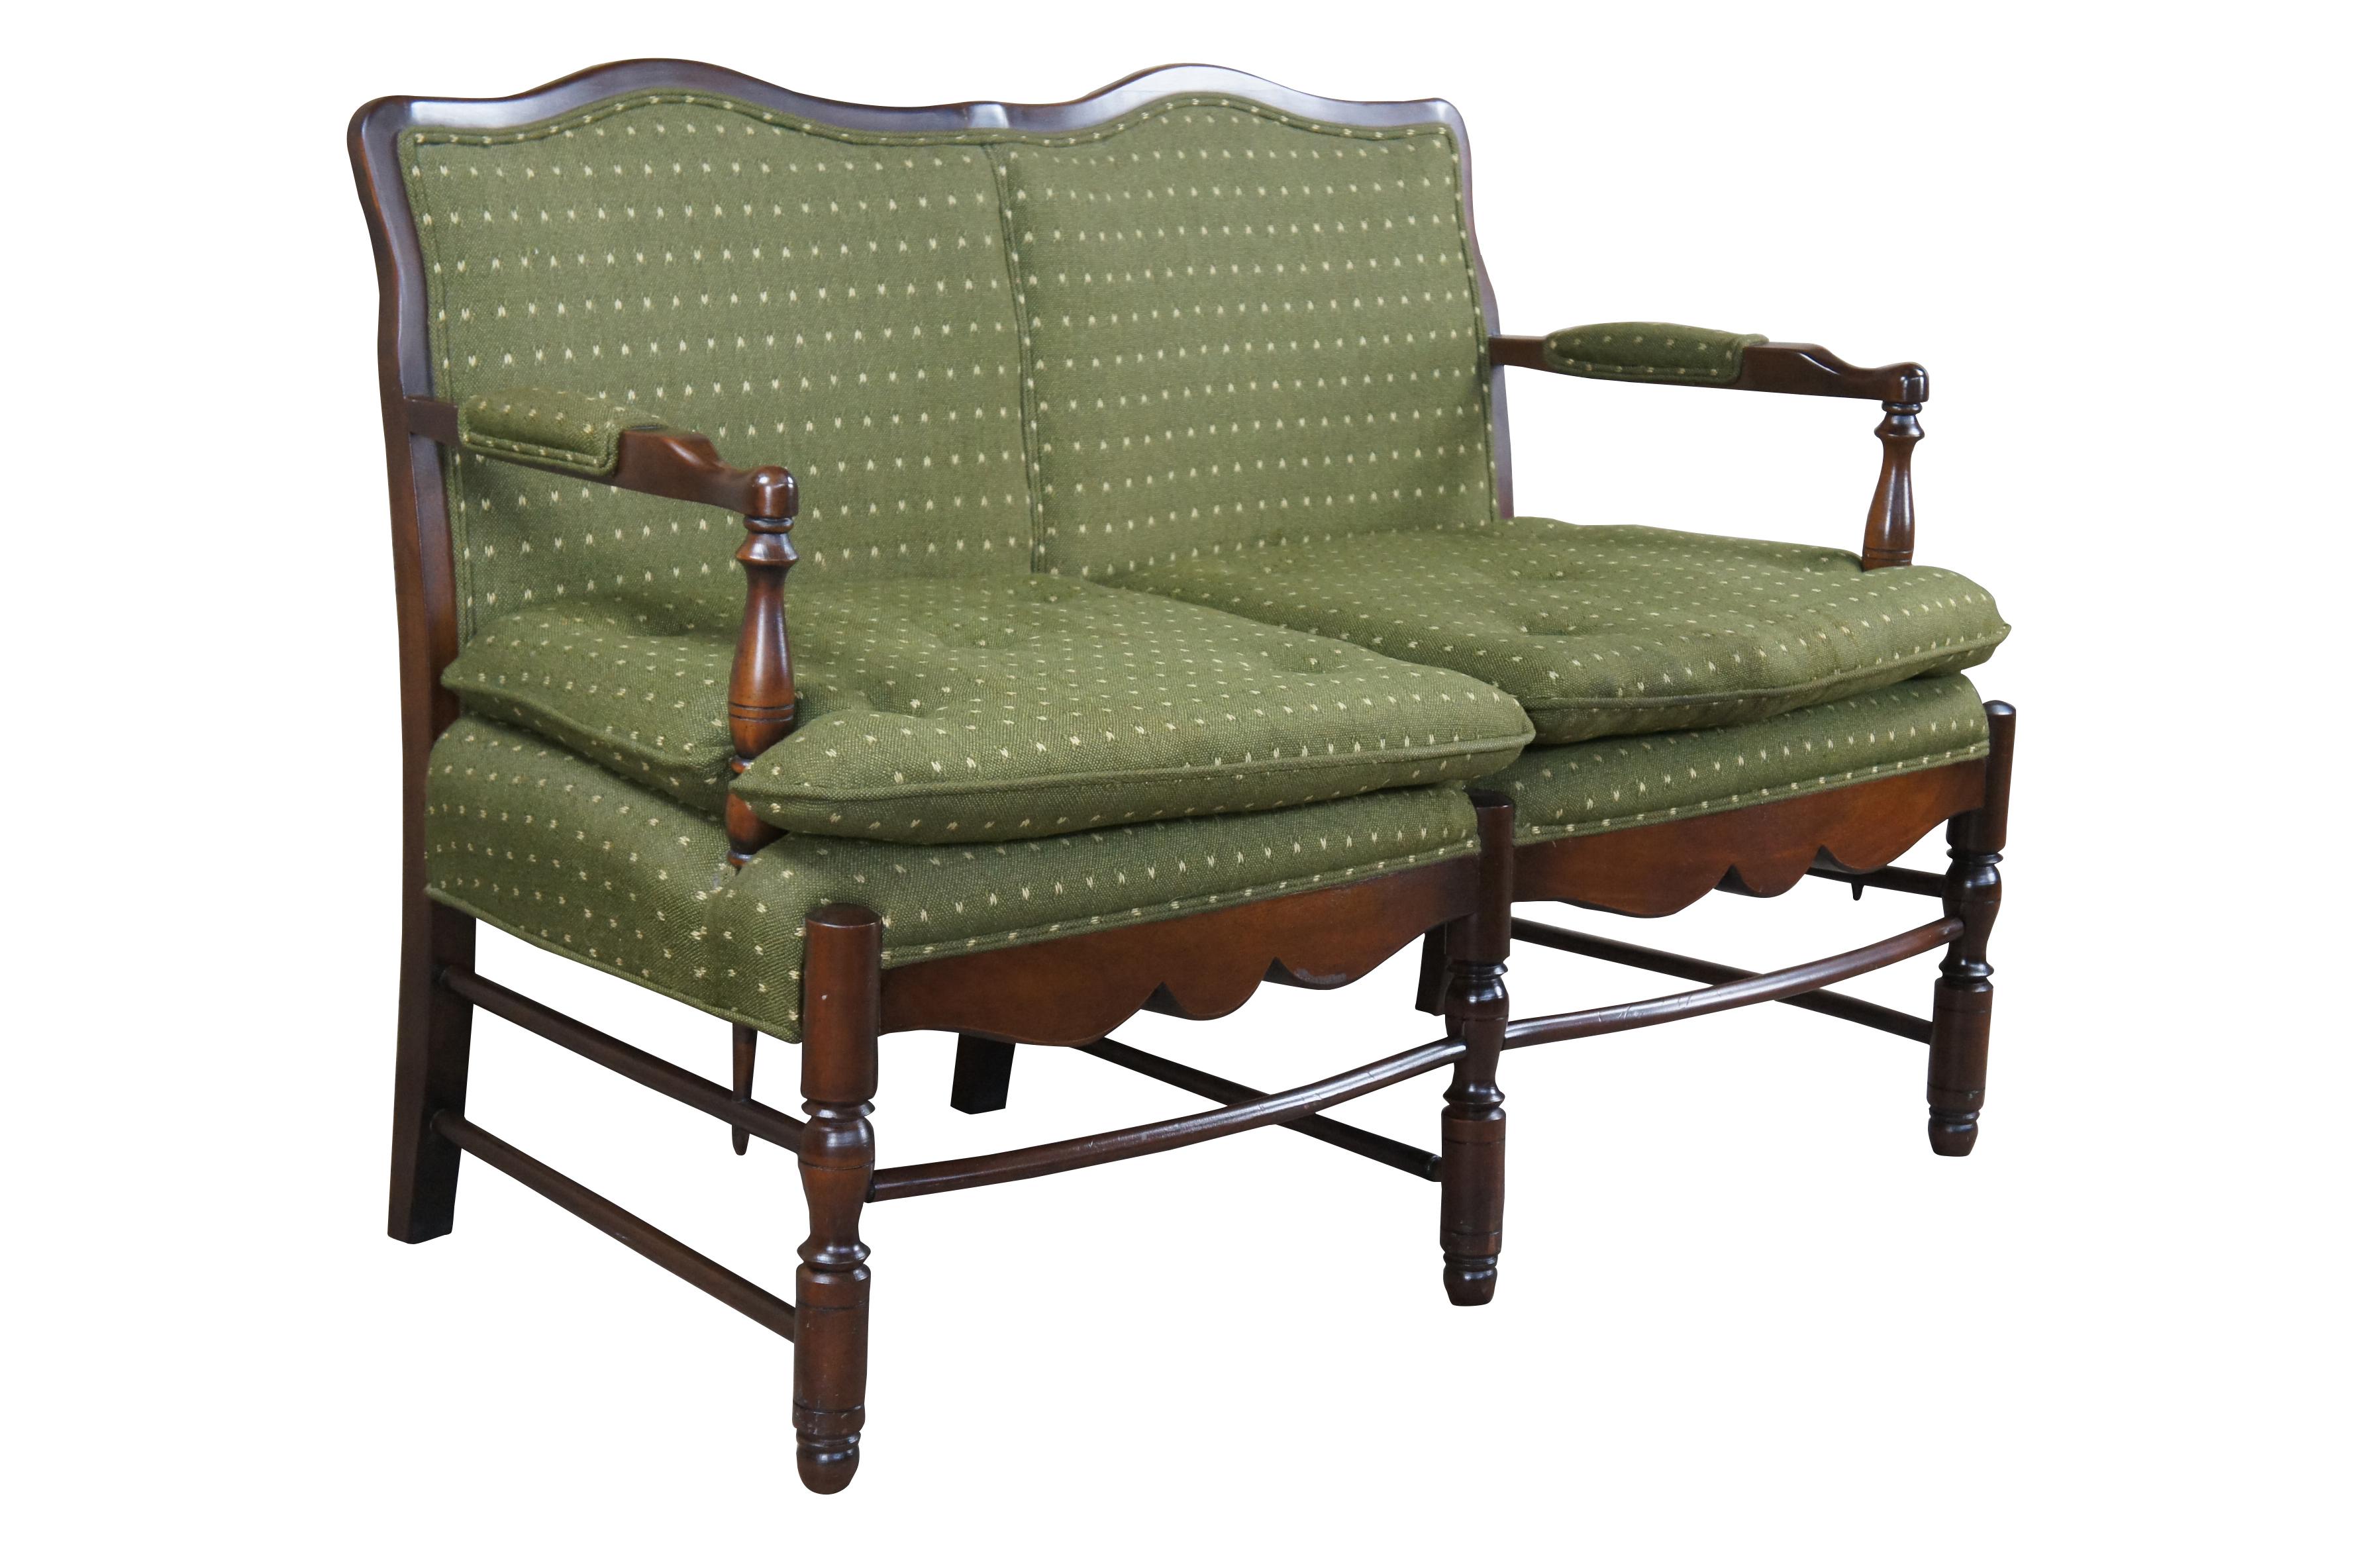 Vintage Country French ladderback settee, circa 1970s.  Features an oak frame with serpentine back, padded arms and skirt.  Upholstered in a green speckled fabric with two tufted removable cushions.

Dimensions:
28